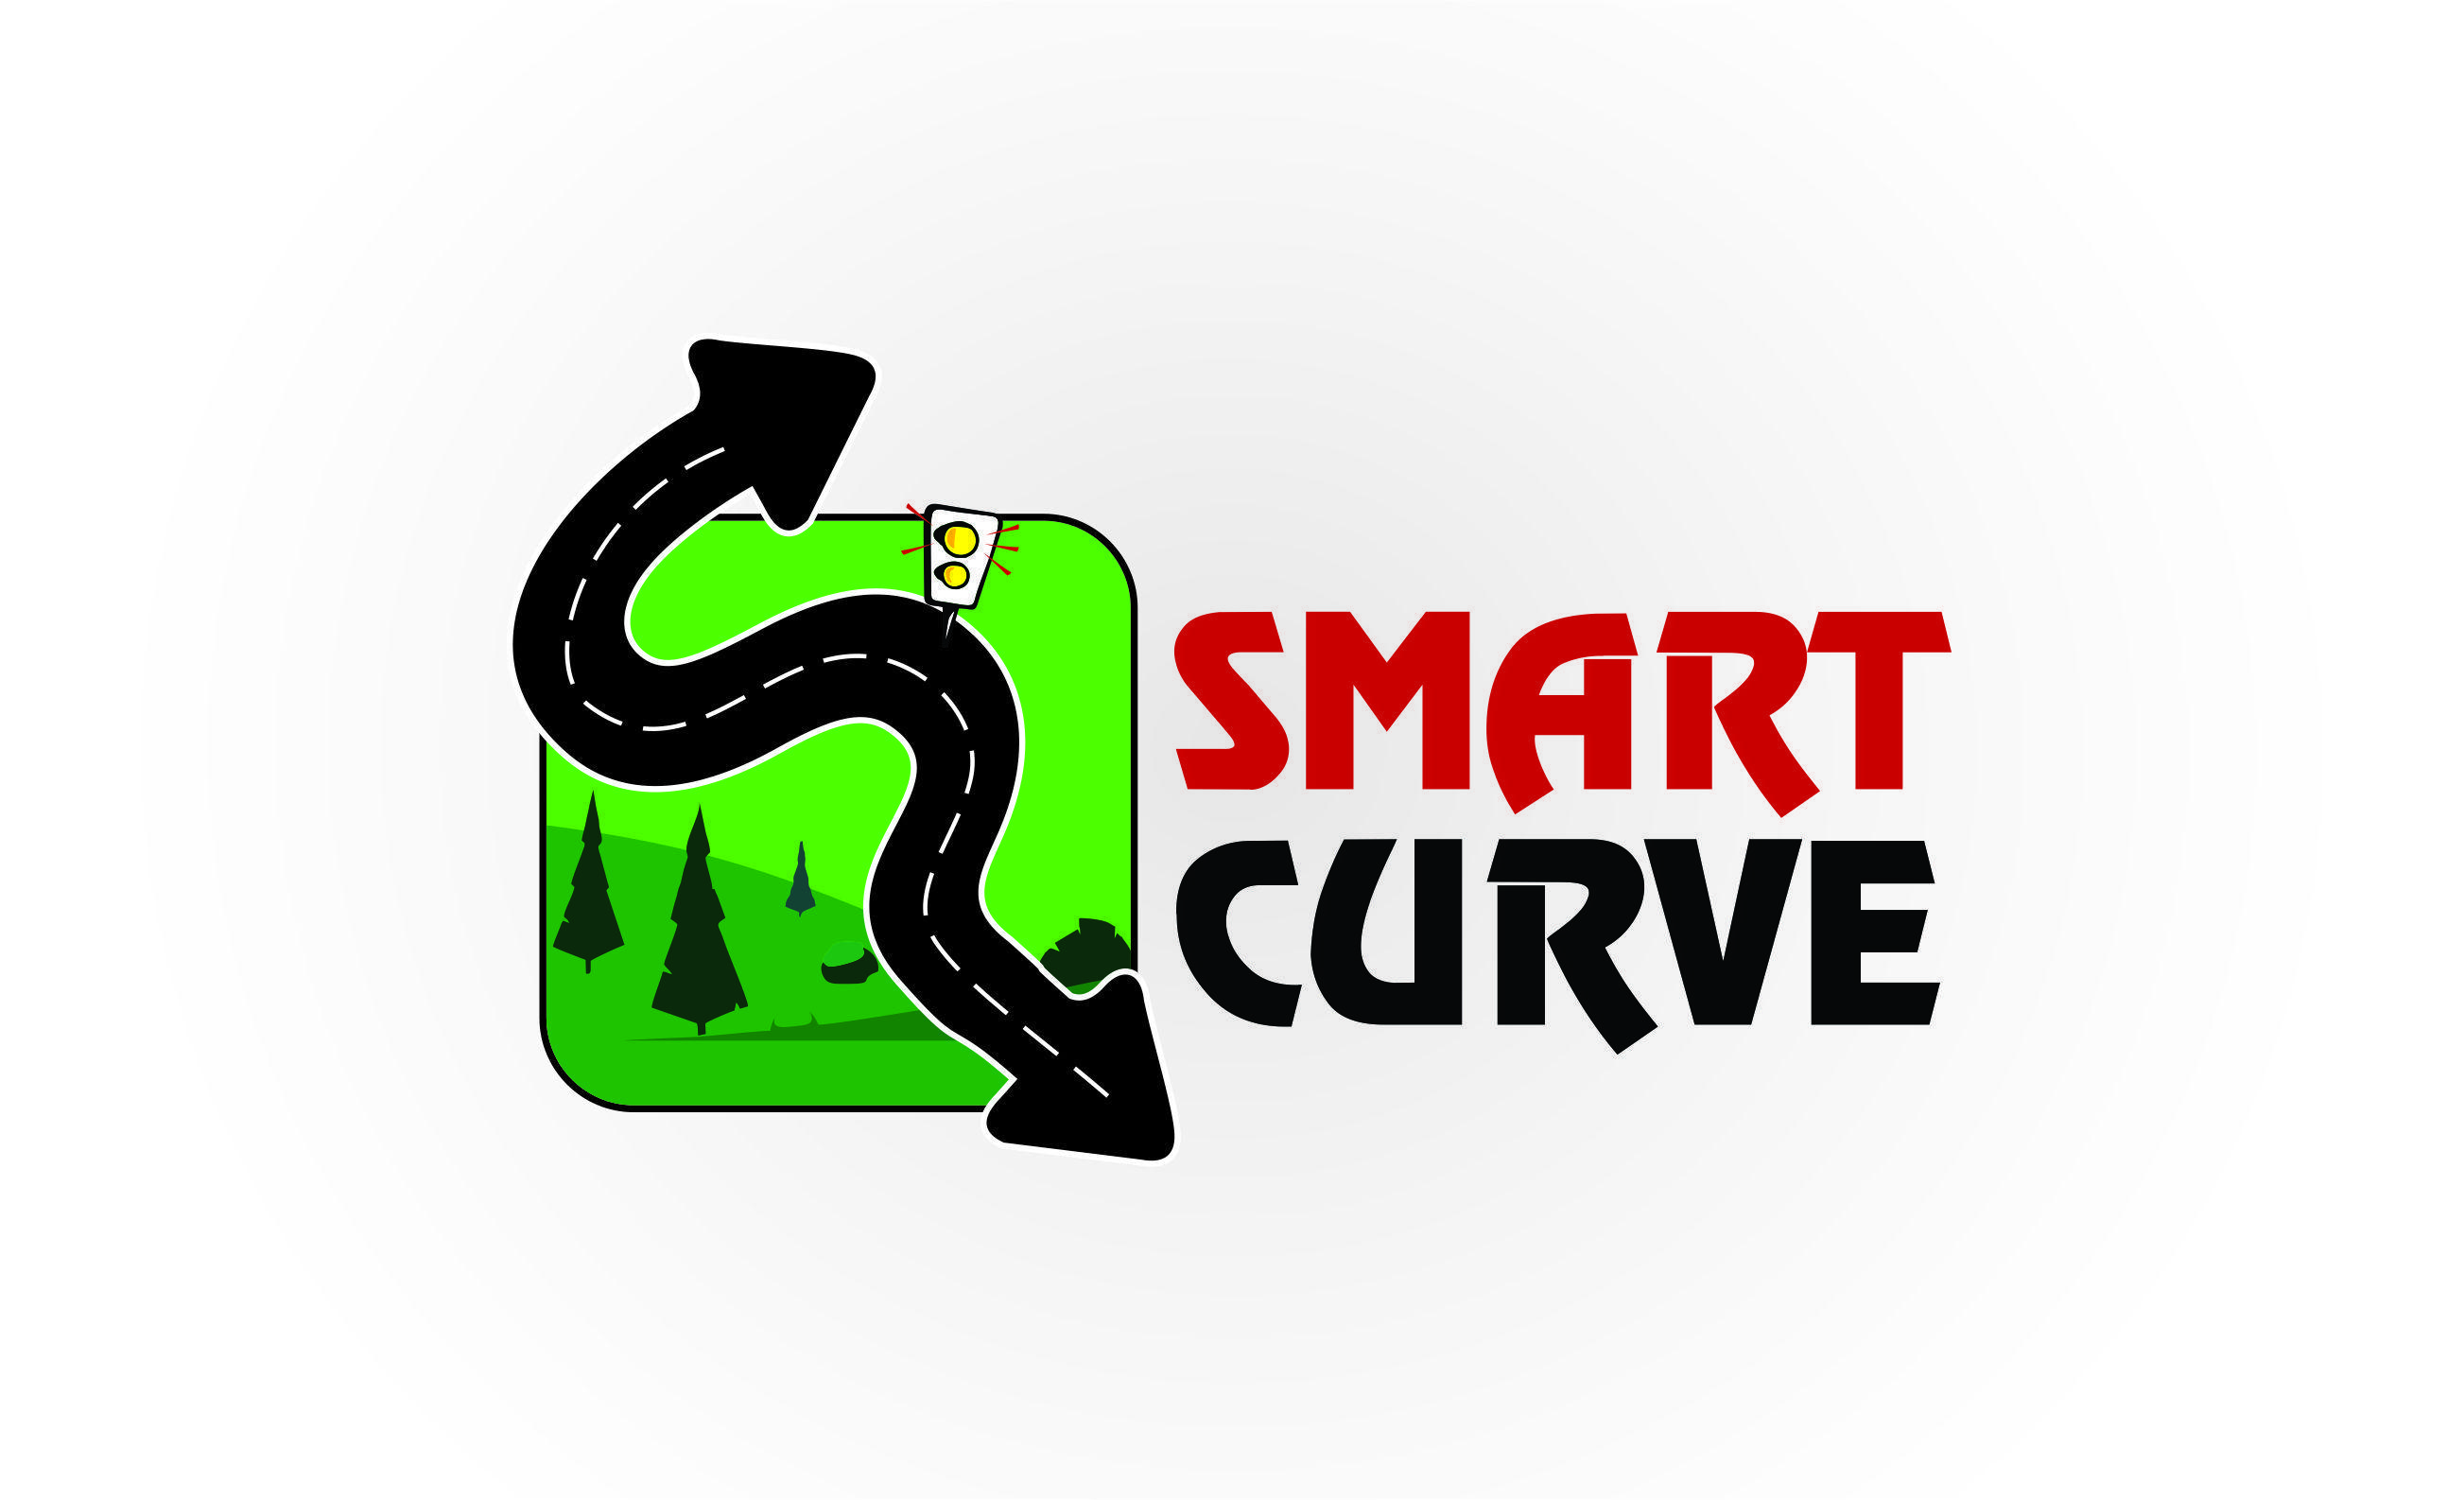 Curves Logo - Smart curve logo designed for road safety lights, which used